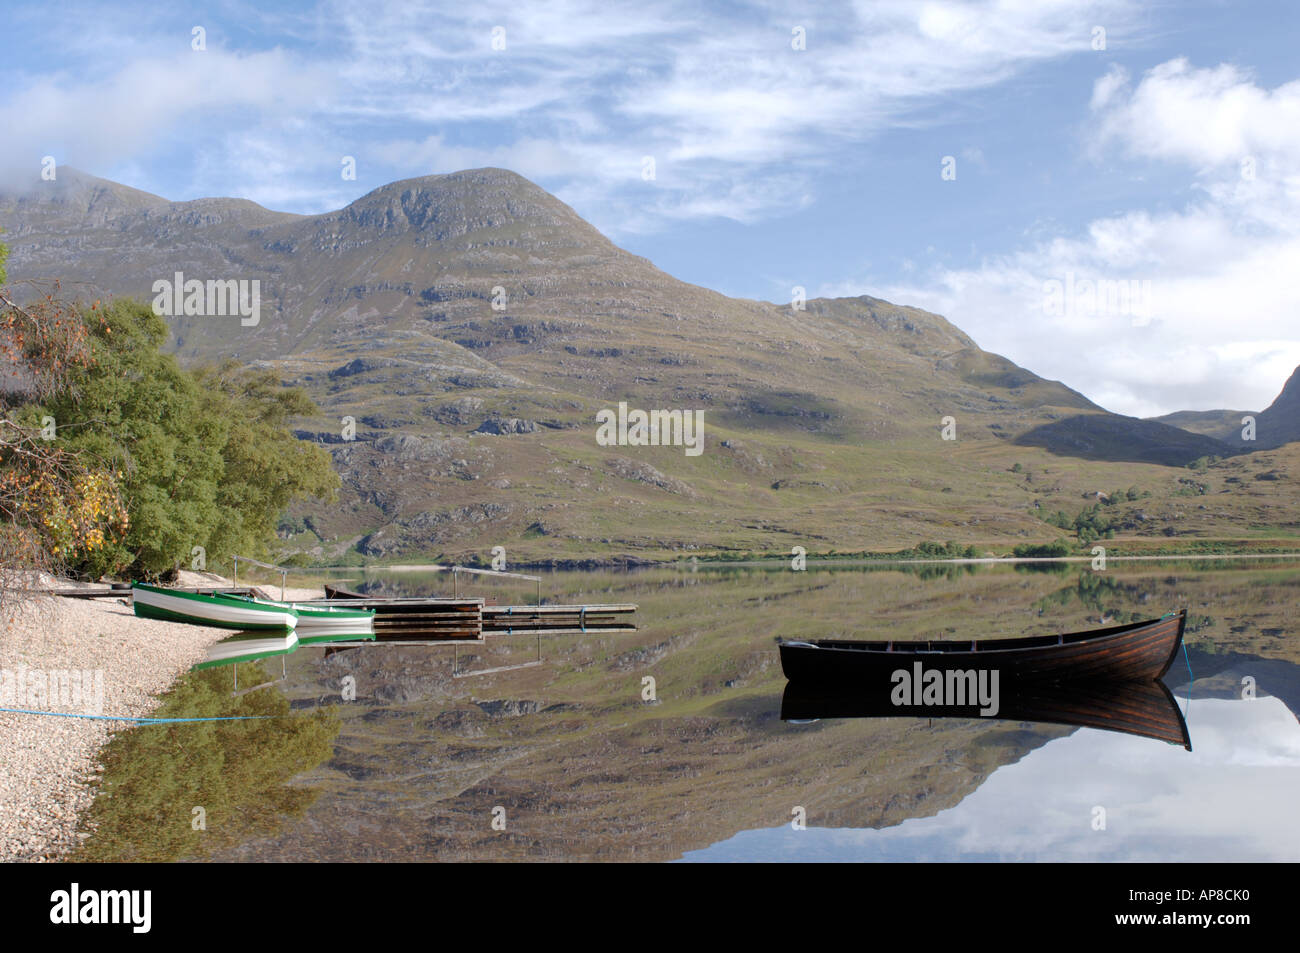 Fishing boats at their moorings on Calm Loch Marree, Kinlochewe. Wester Ross. XPL 3486-340 Stock Photo